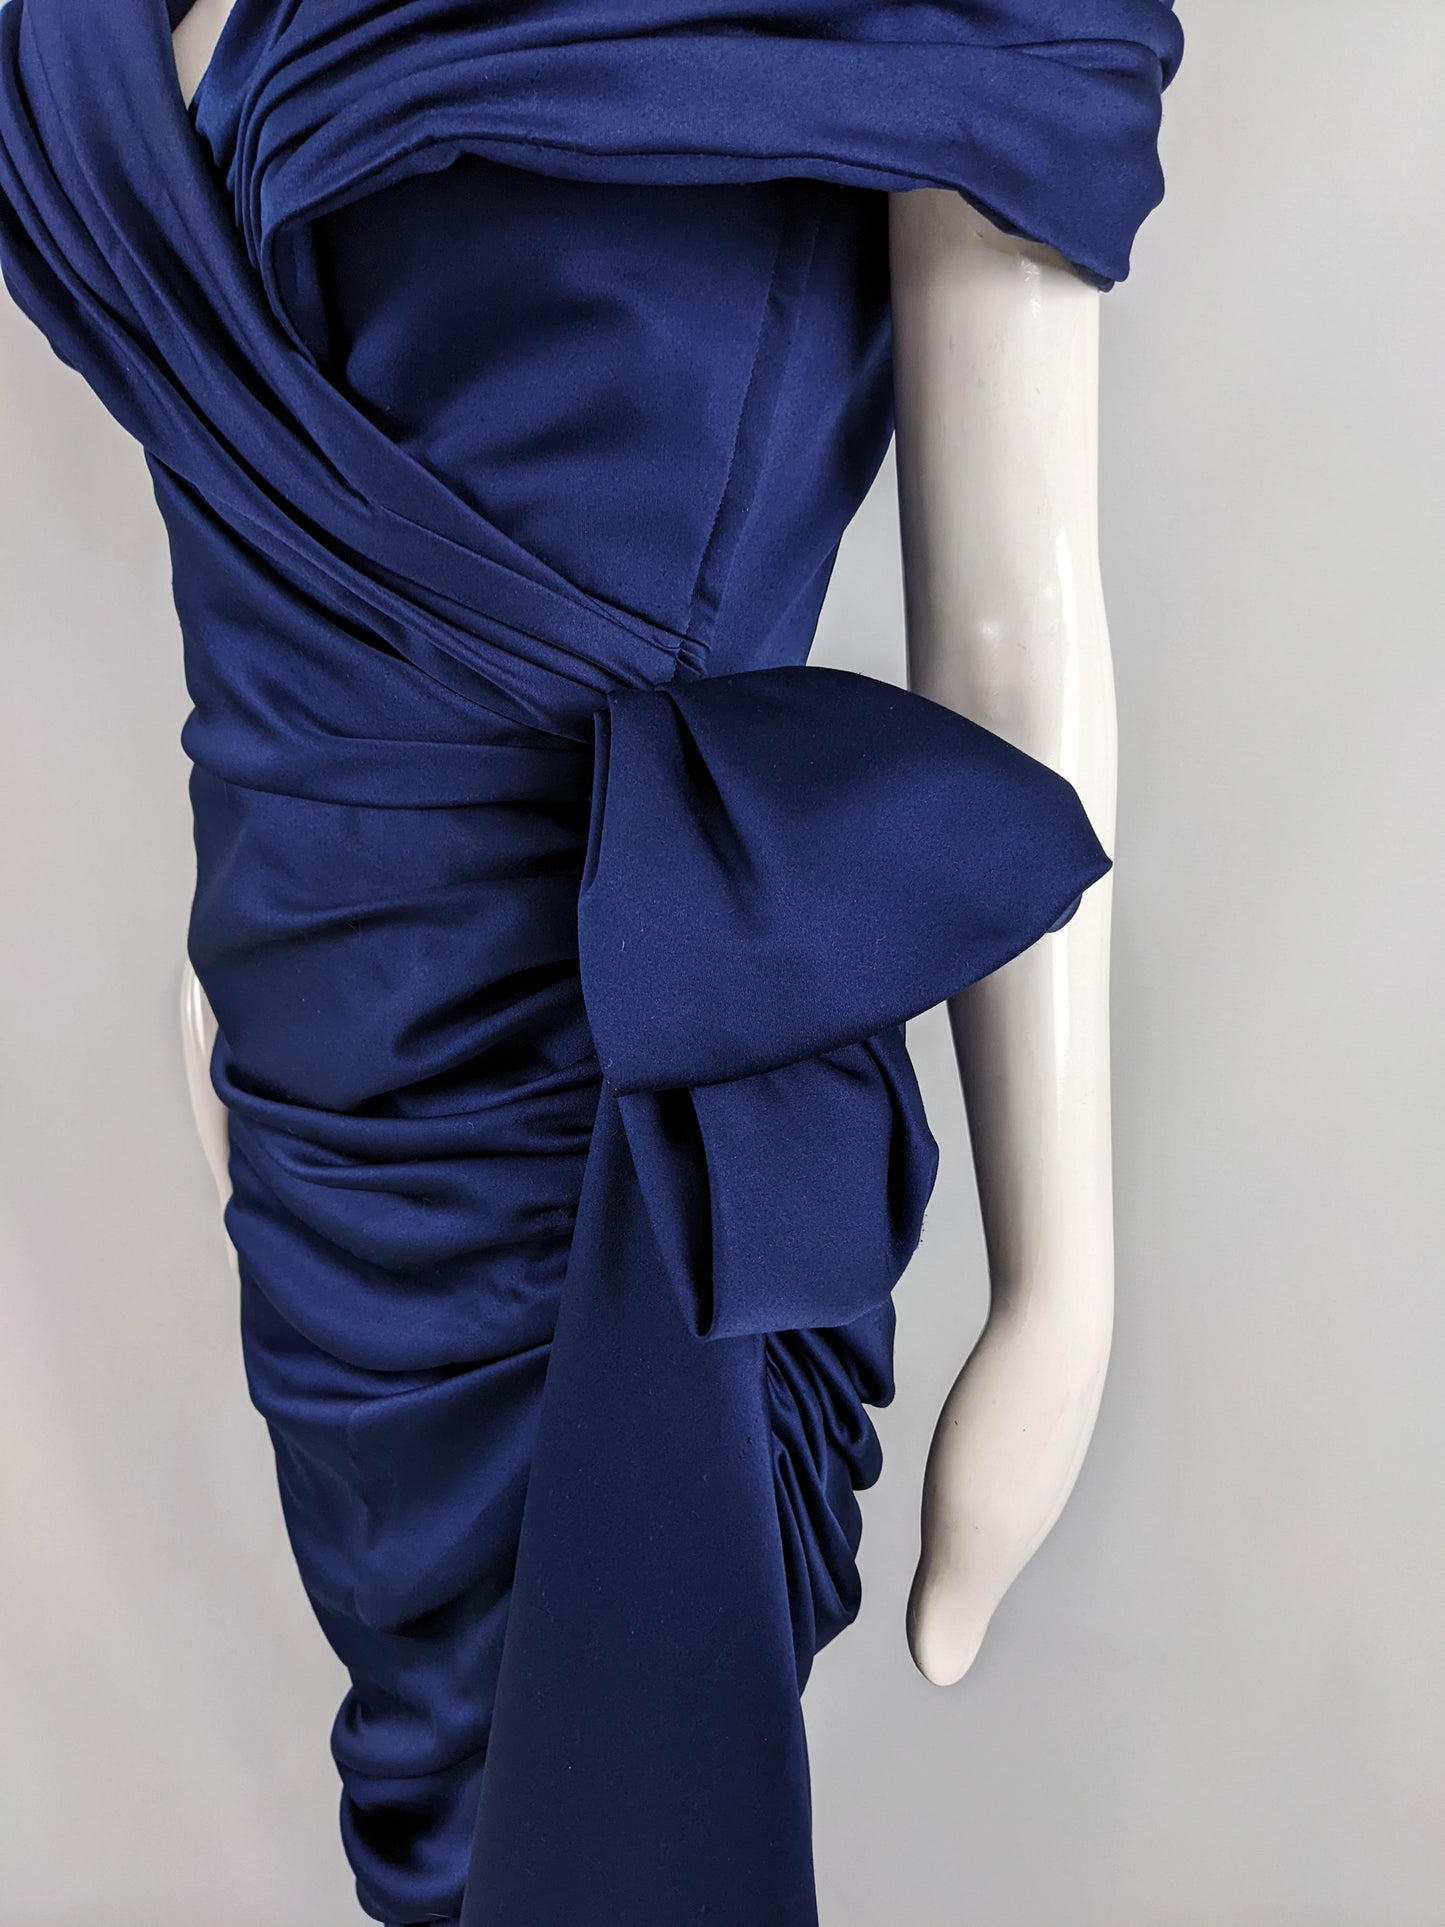 Victor Costa Vintage Dark Blue Draped Bow Evening Gown, 1980s